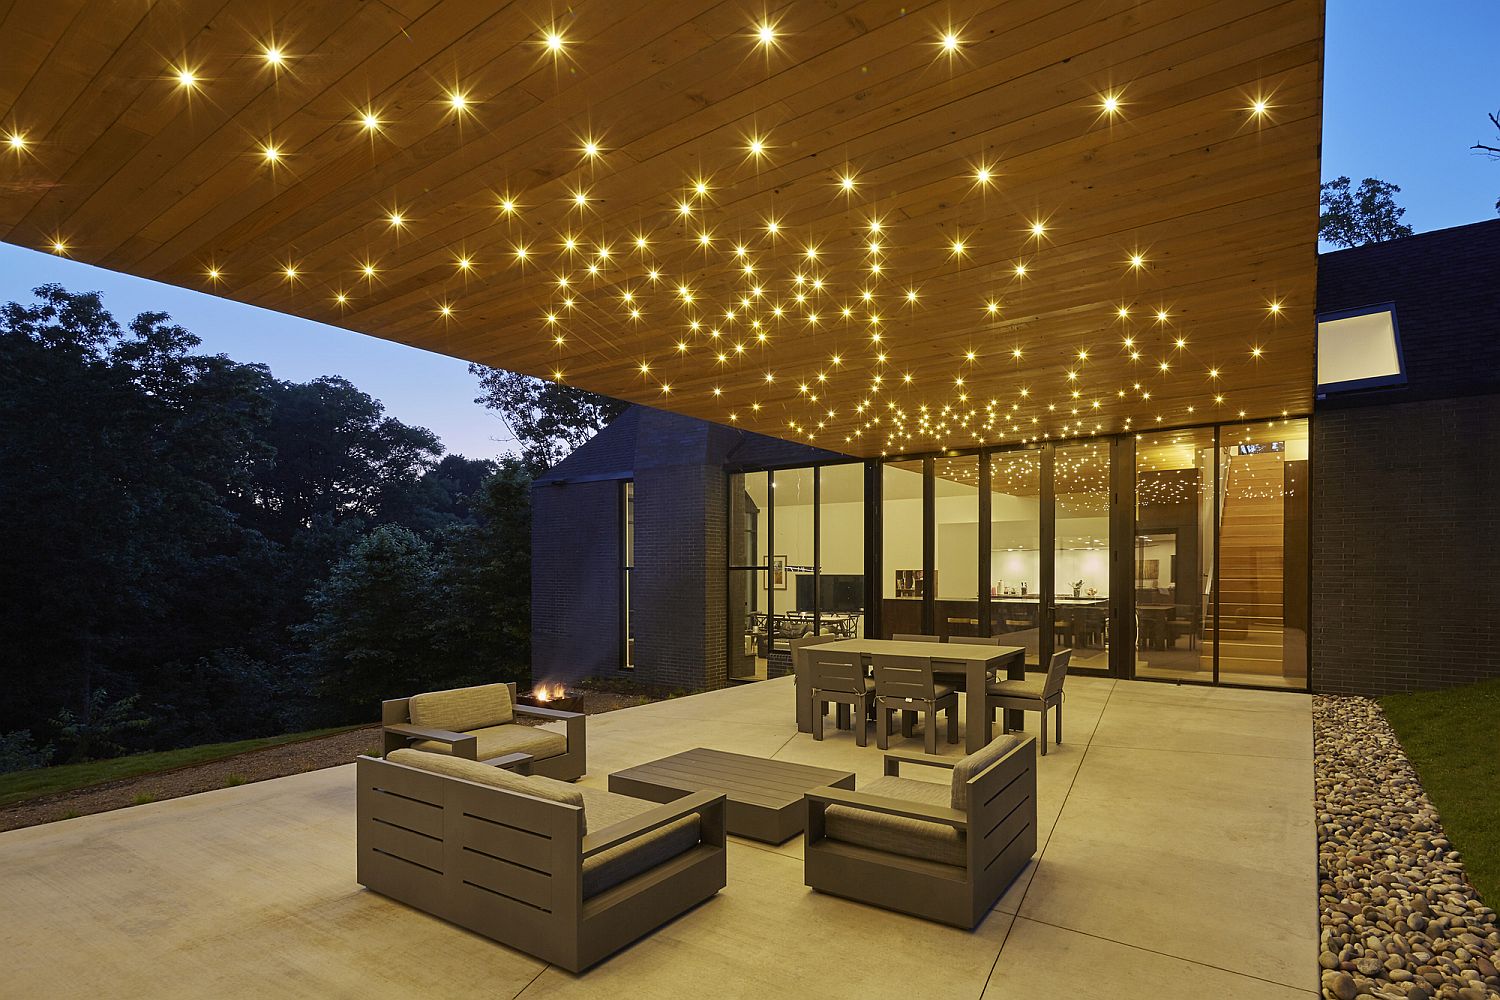 Fabulous-sheltered-outdoor-sitting-space-with-brilliant-lighting